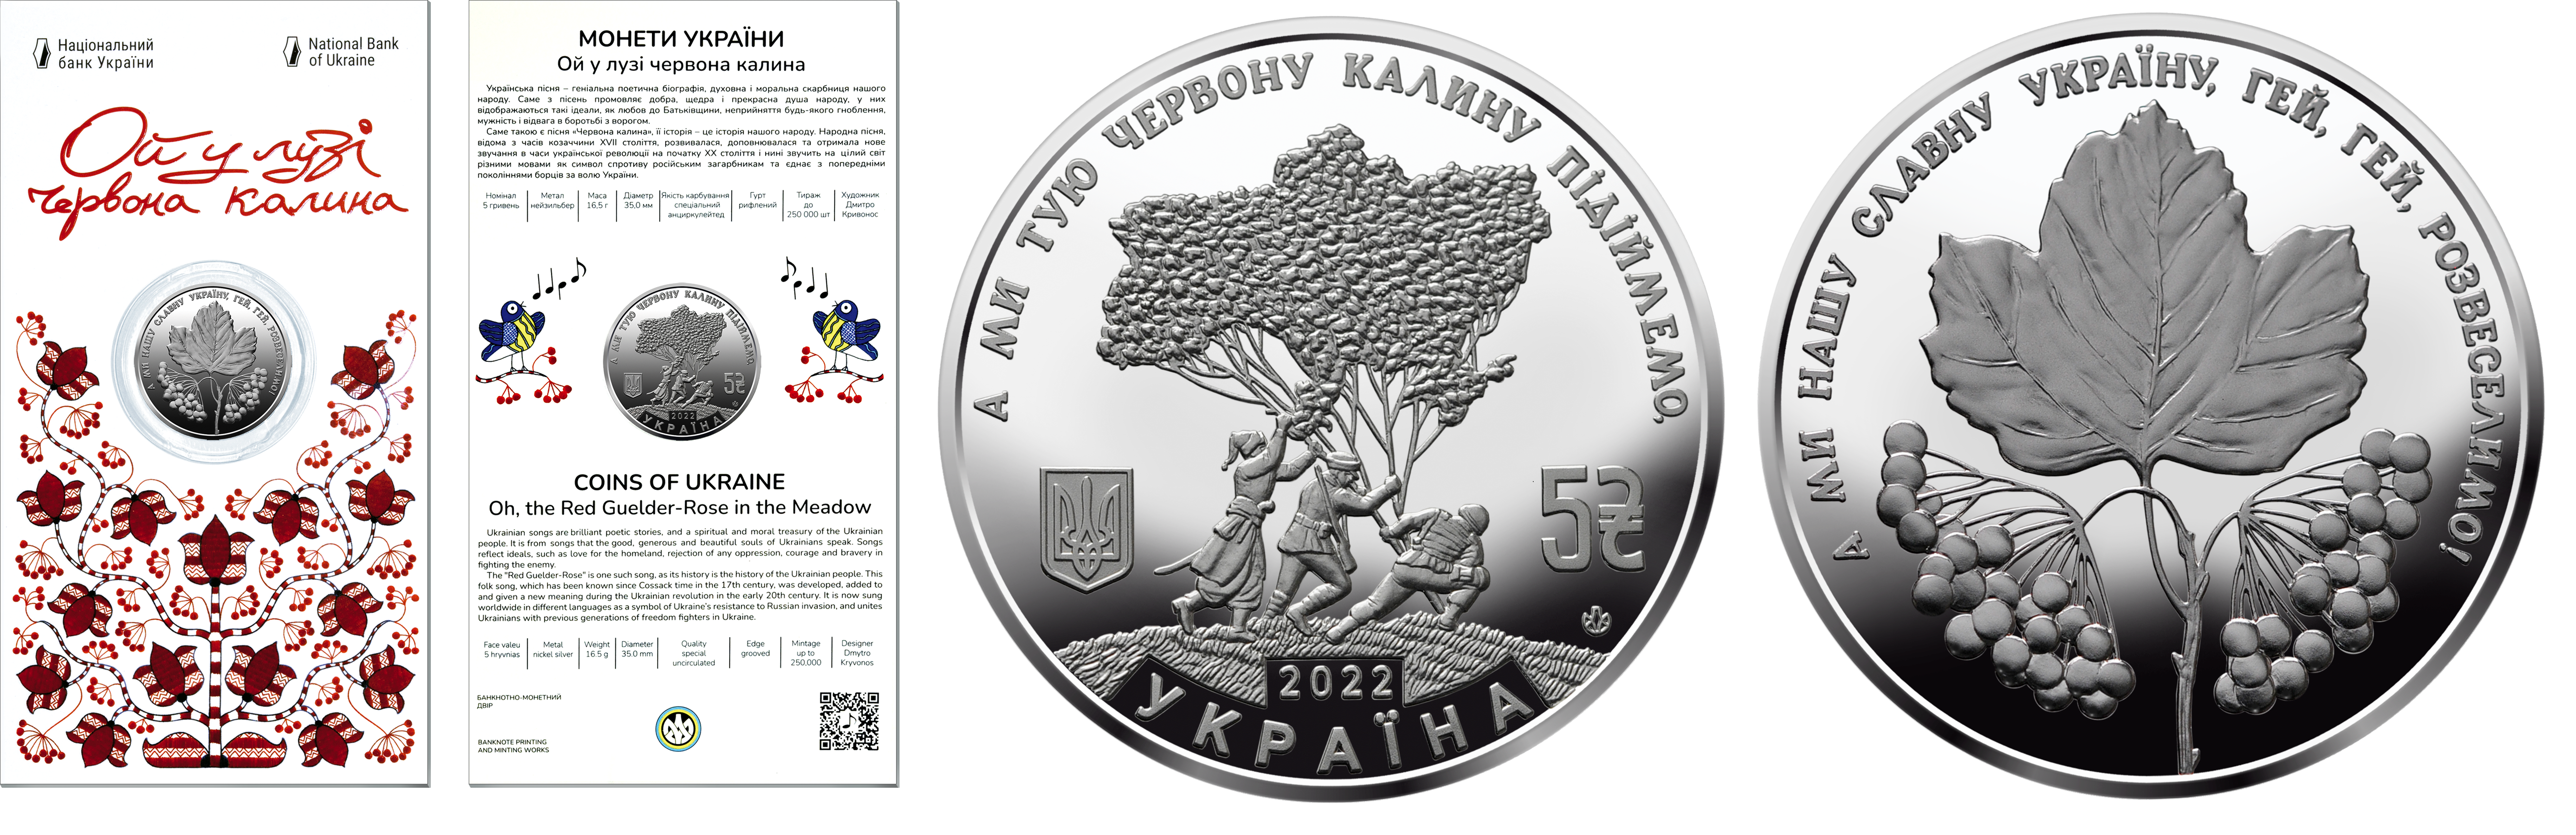 Sale of commemorative coins from MTB BANK • buy commemorative coins in Ukraine at MTB BANK - photo 13 - mtb.ua